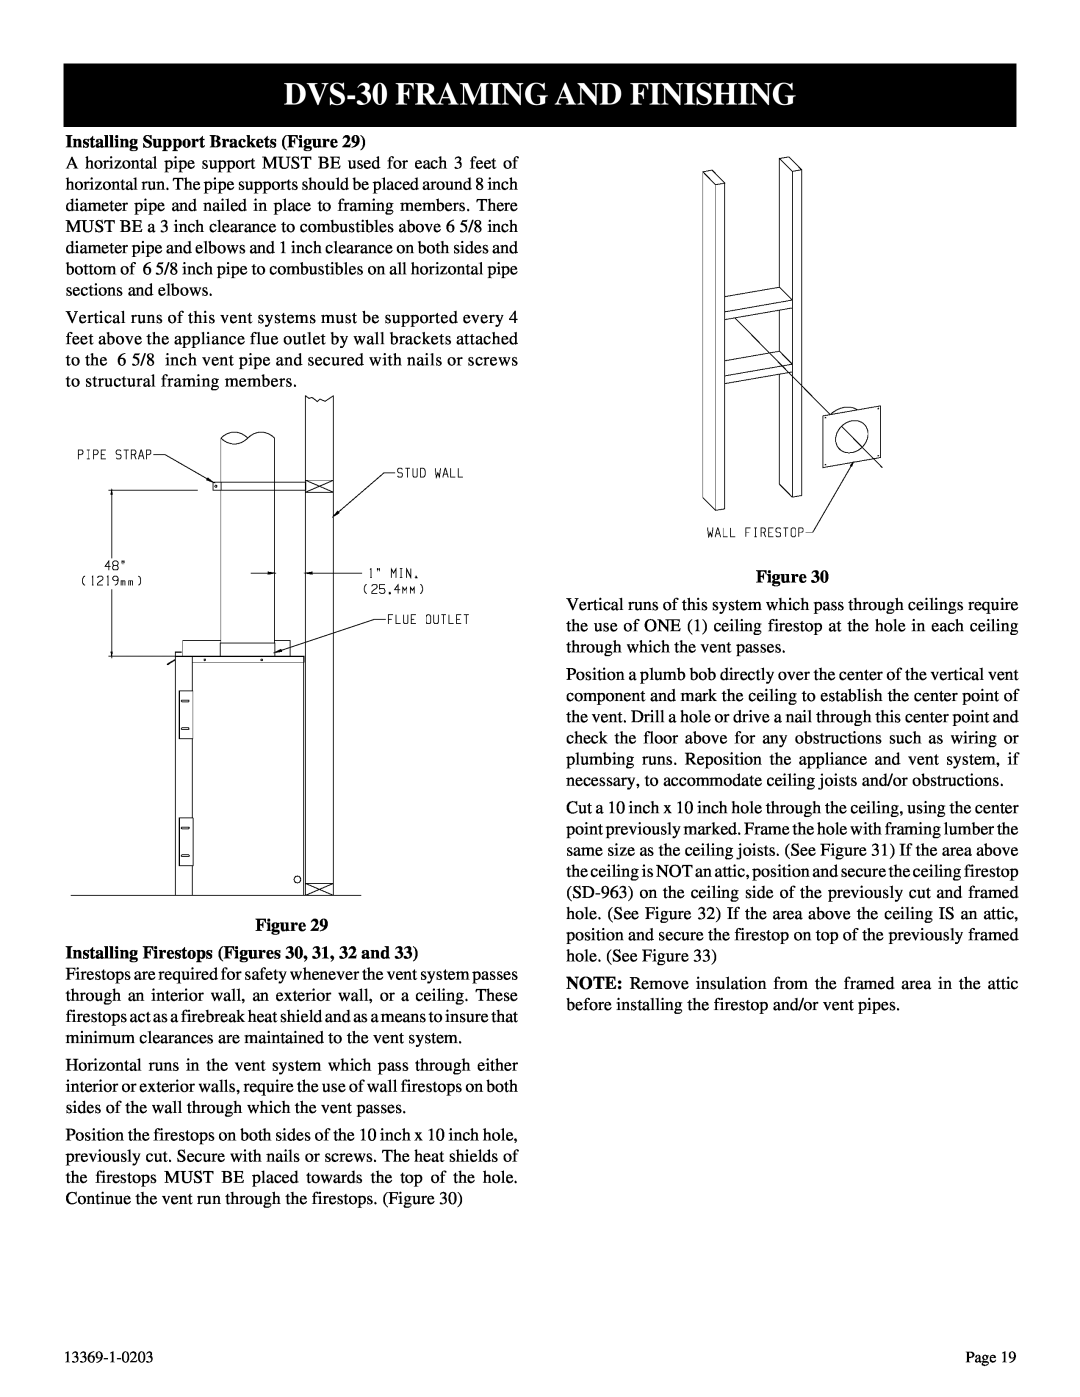 DVS 30-2 DVS-30FRAMING AND FINISHING, Installing Support Brackets Figure, Installing Firestops Figures 30, 31, 32 and 